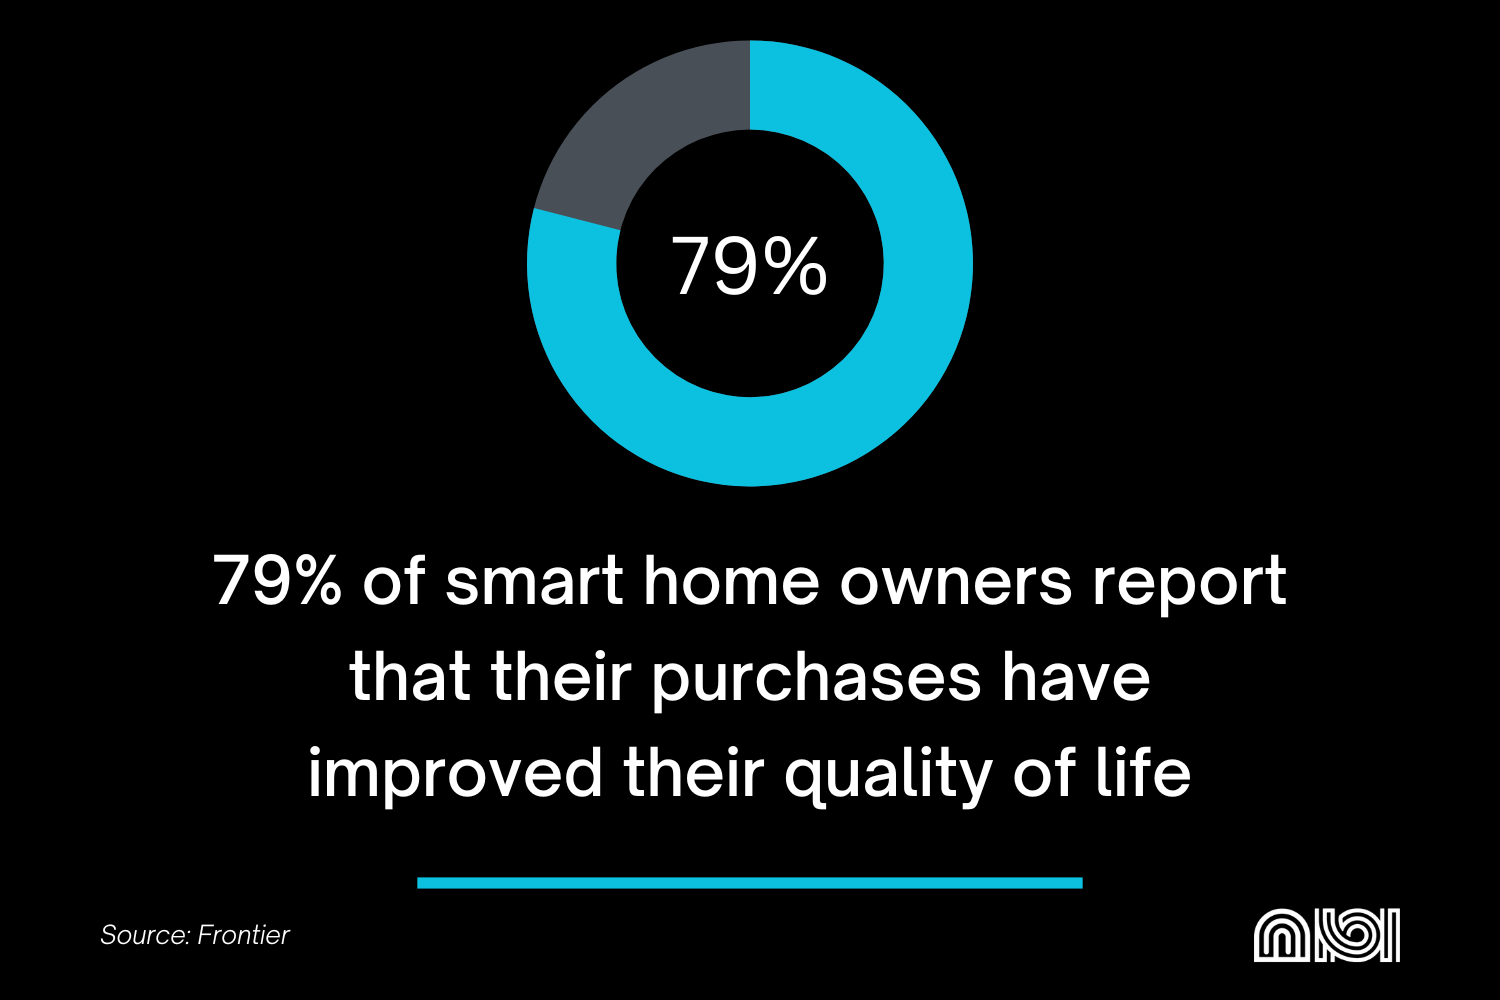 79% of smart home owners experience an improved quality of life due to their devices